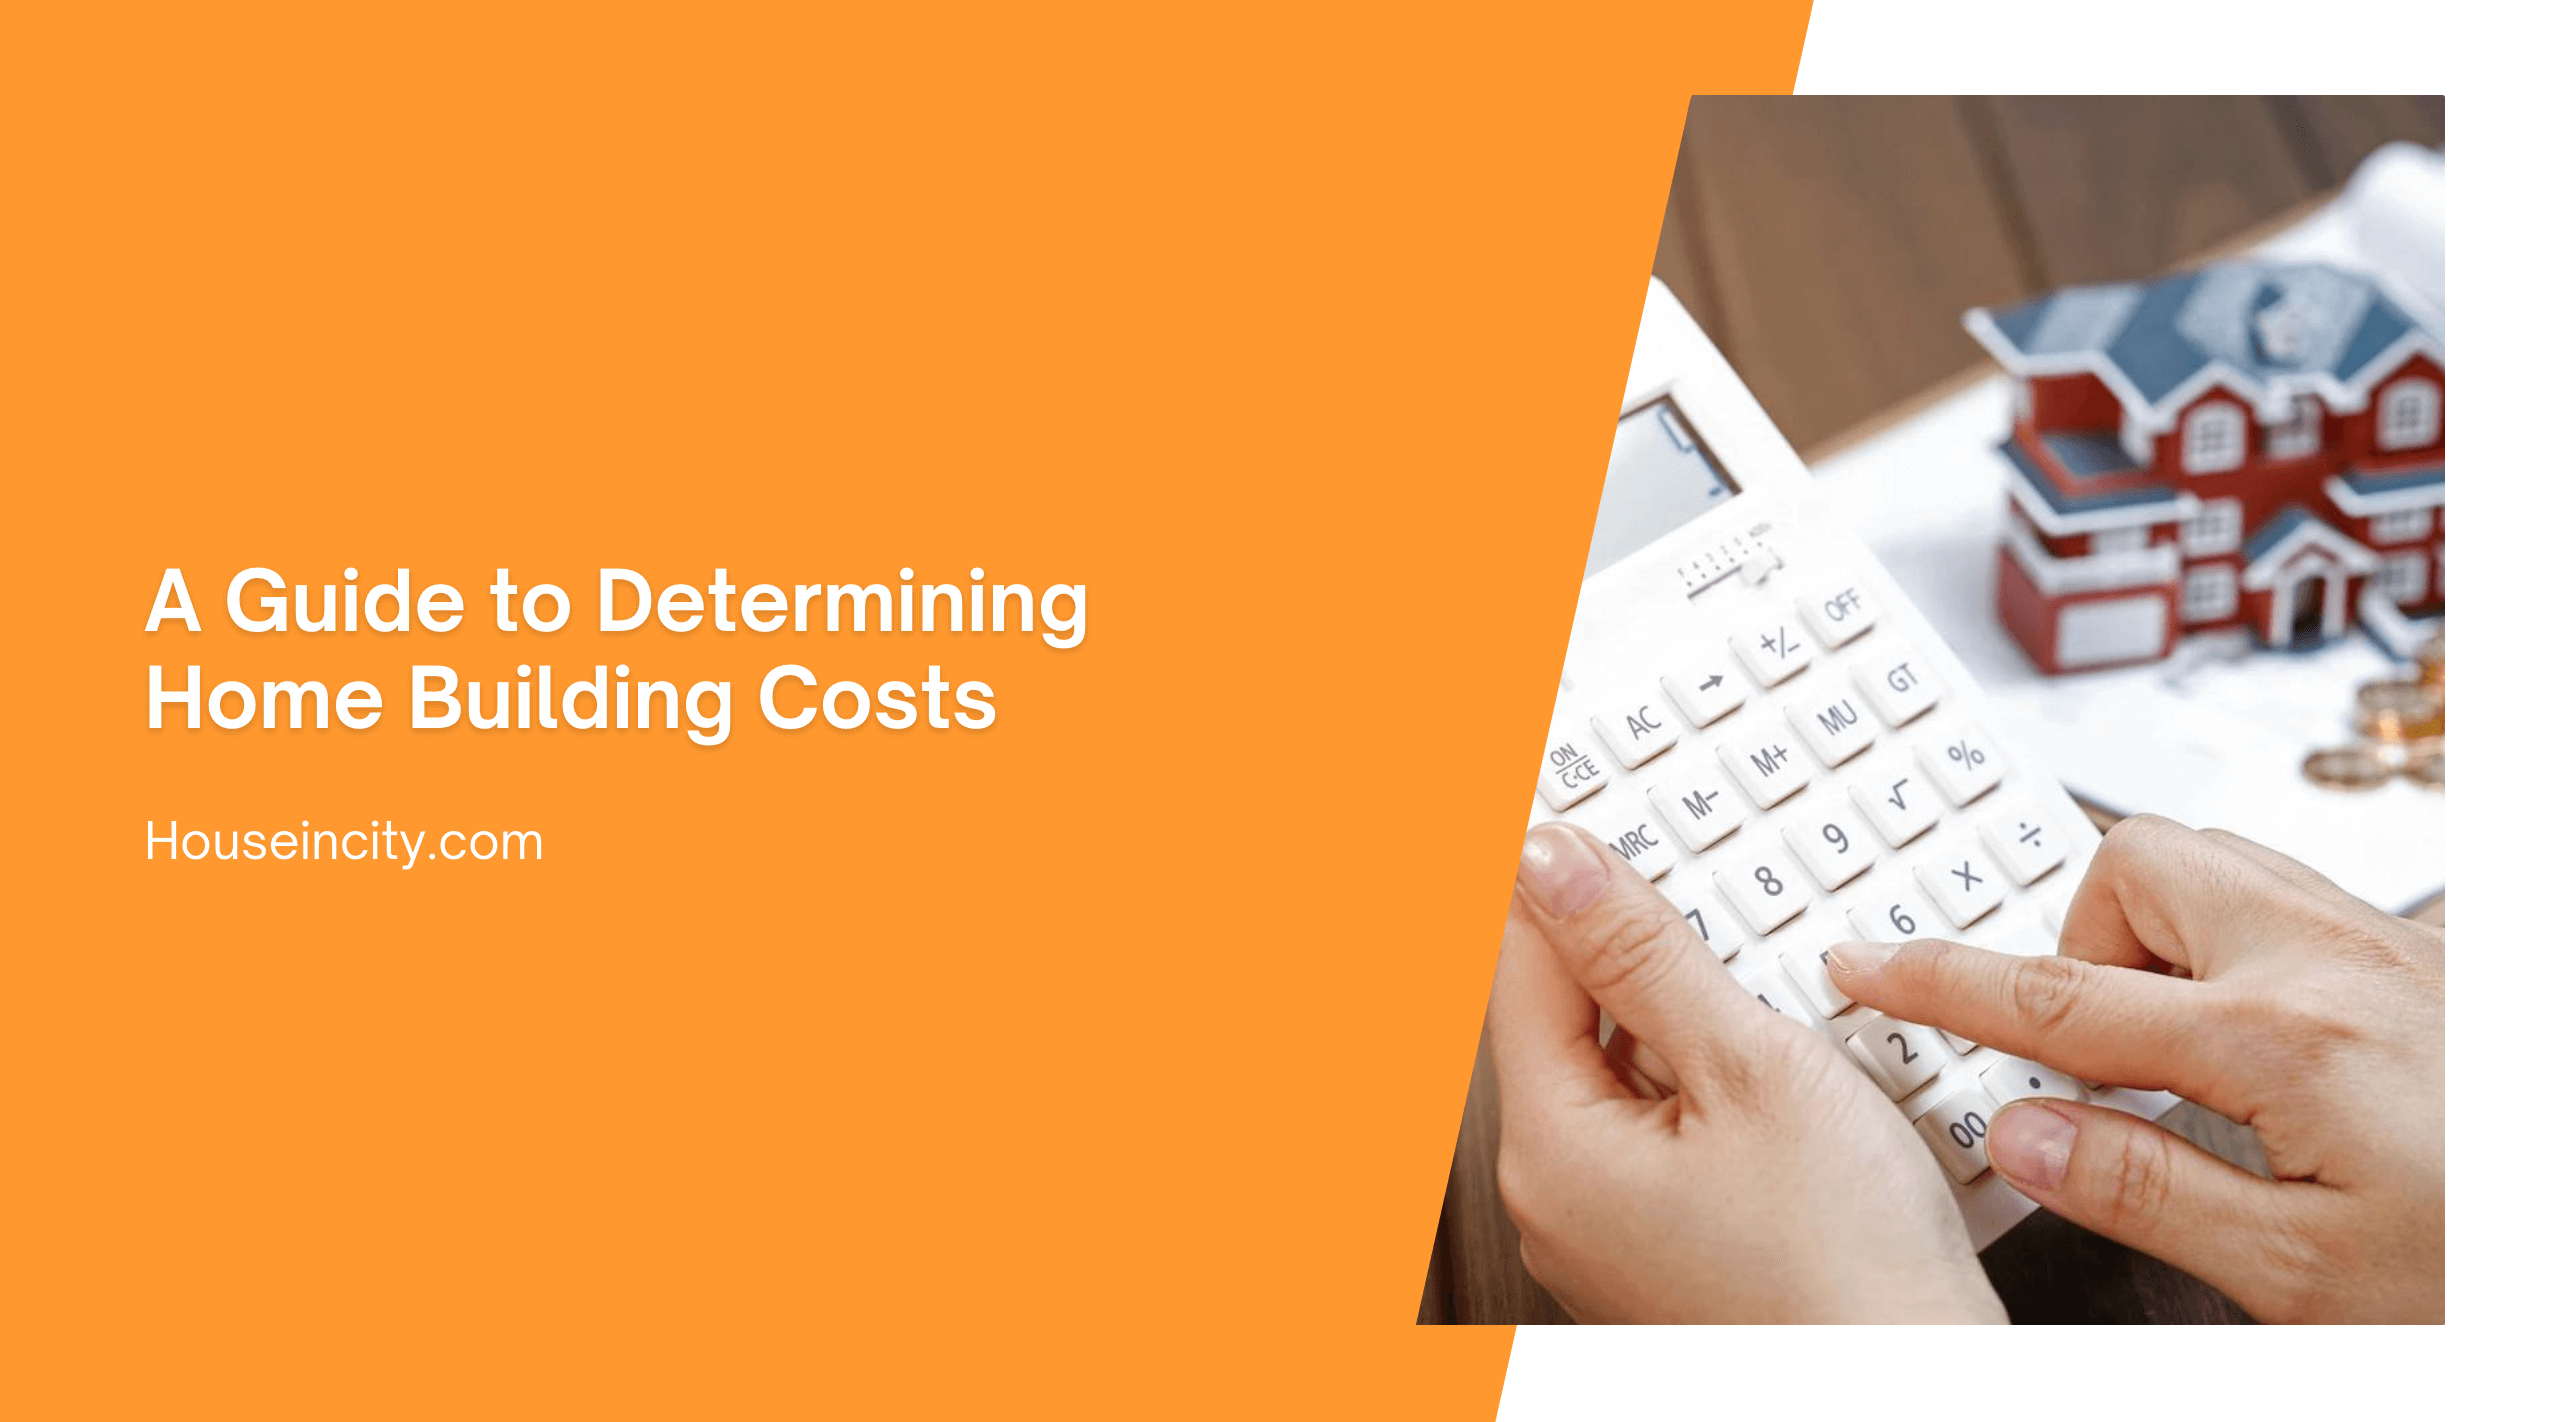 A Guide to Determining Home Building Costs